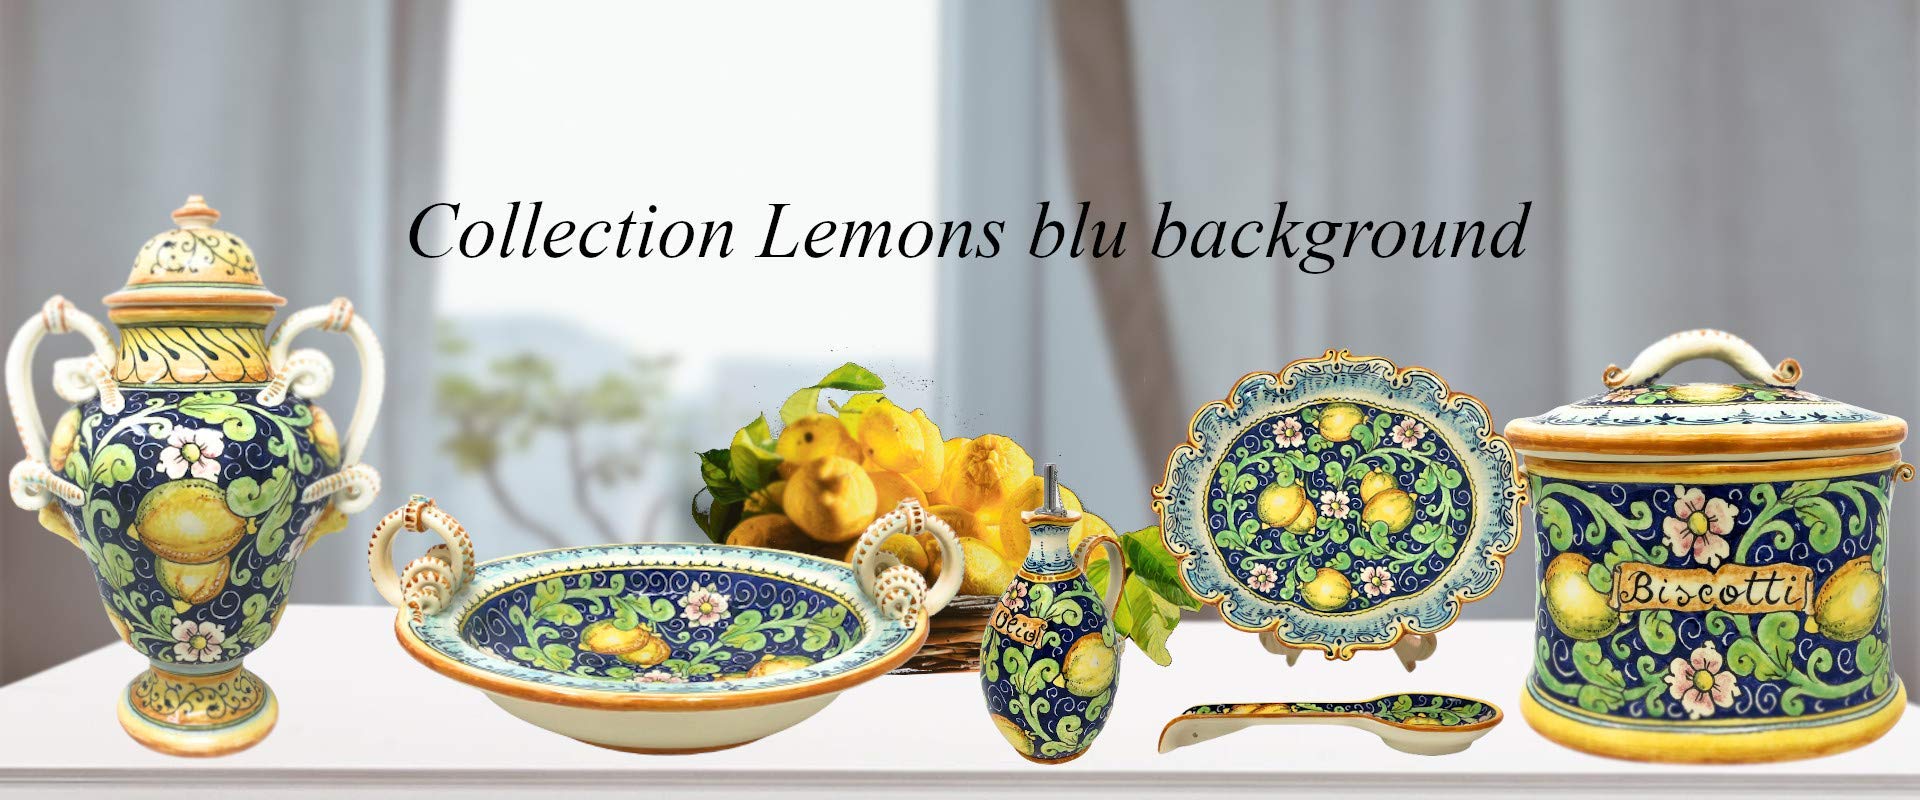 CERAMICHE D'ARTE PARRINI - Italian Ceramic Tray Serving Plate Lemons Art Pottery Paint Made in ITALY Tuscan